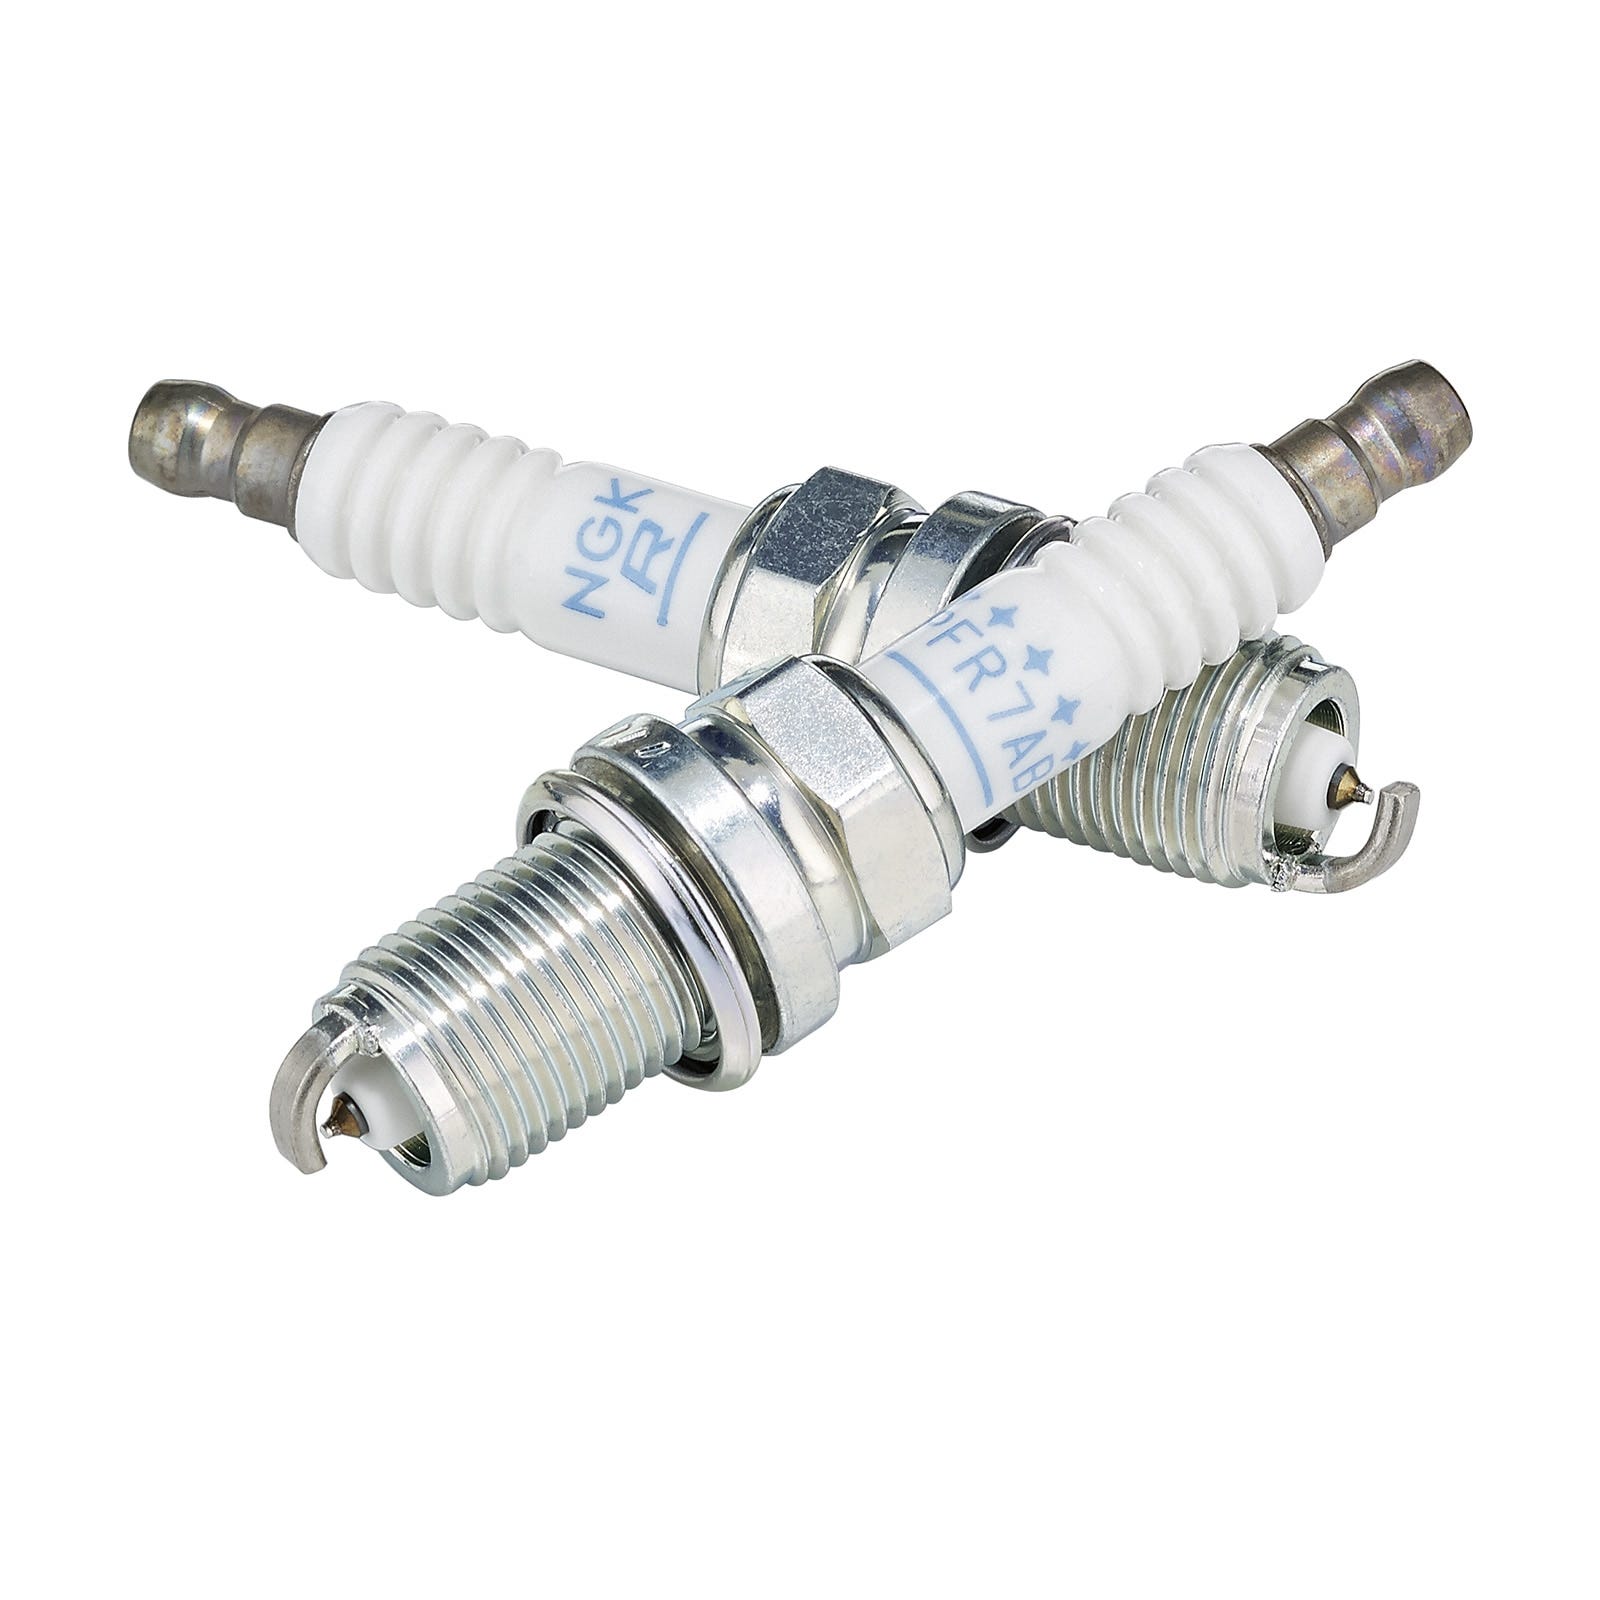 NGK Spark Plugs - 415129944 - The Parts Lodge